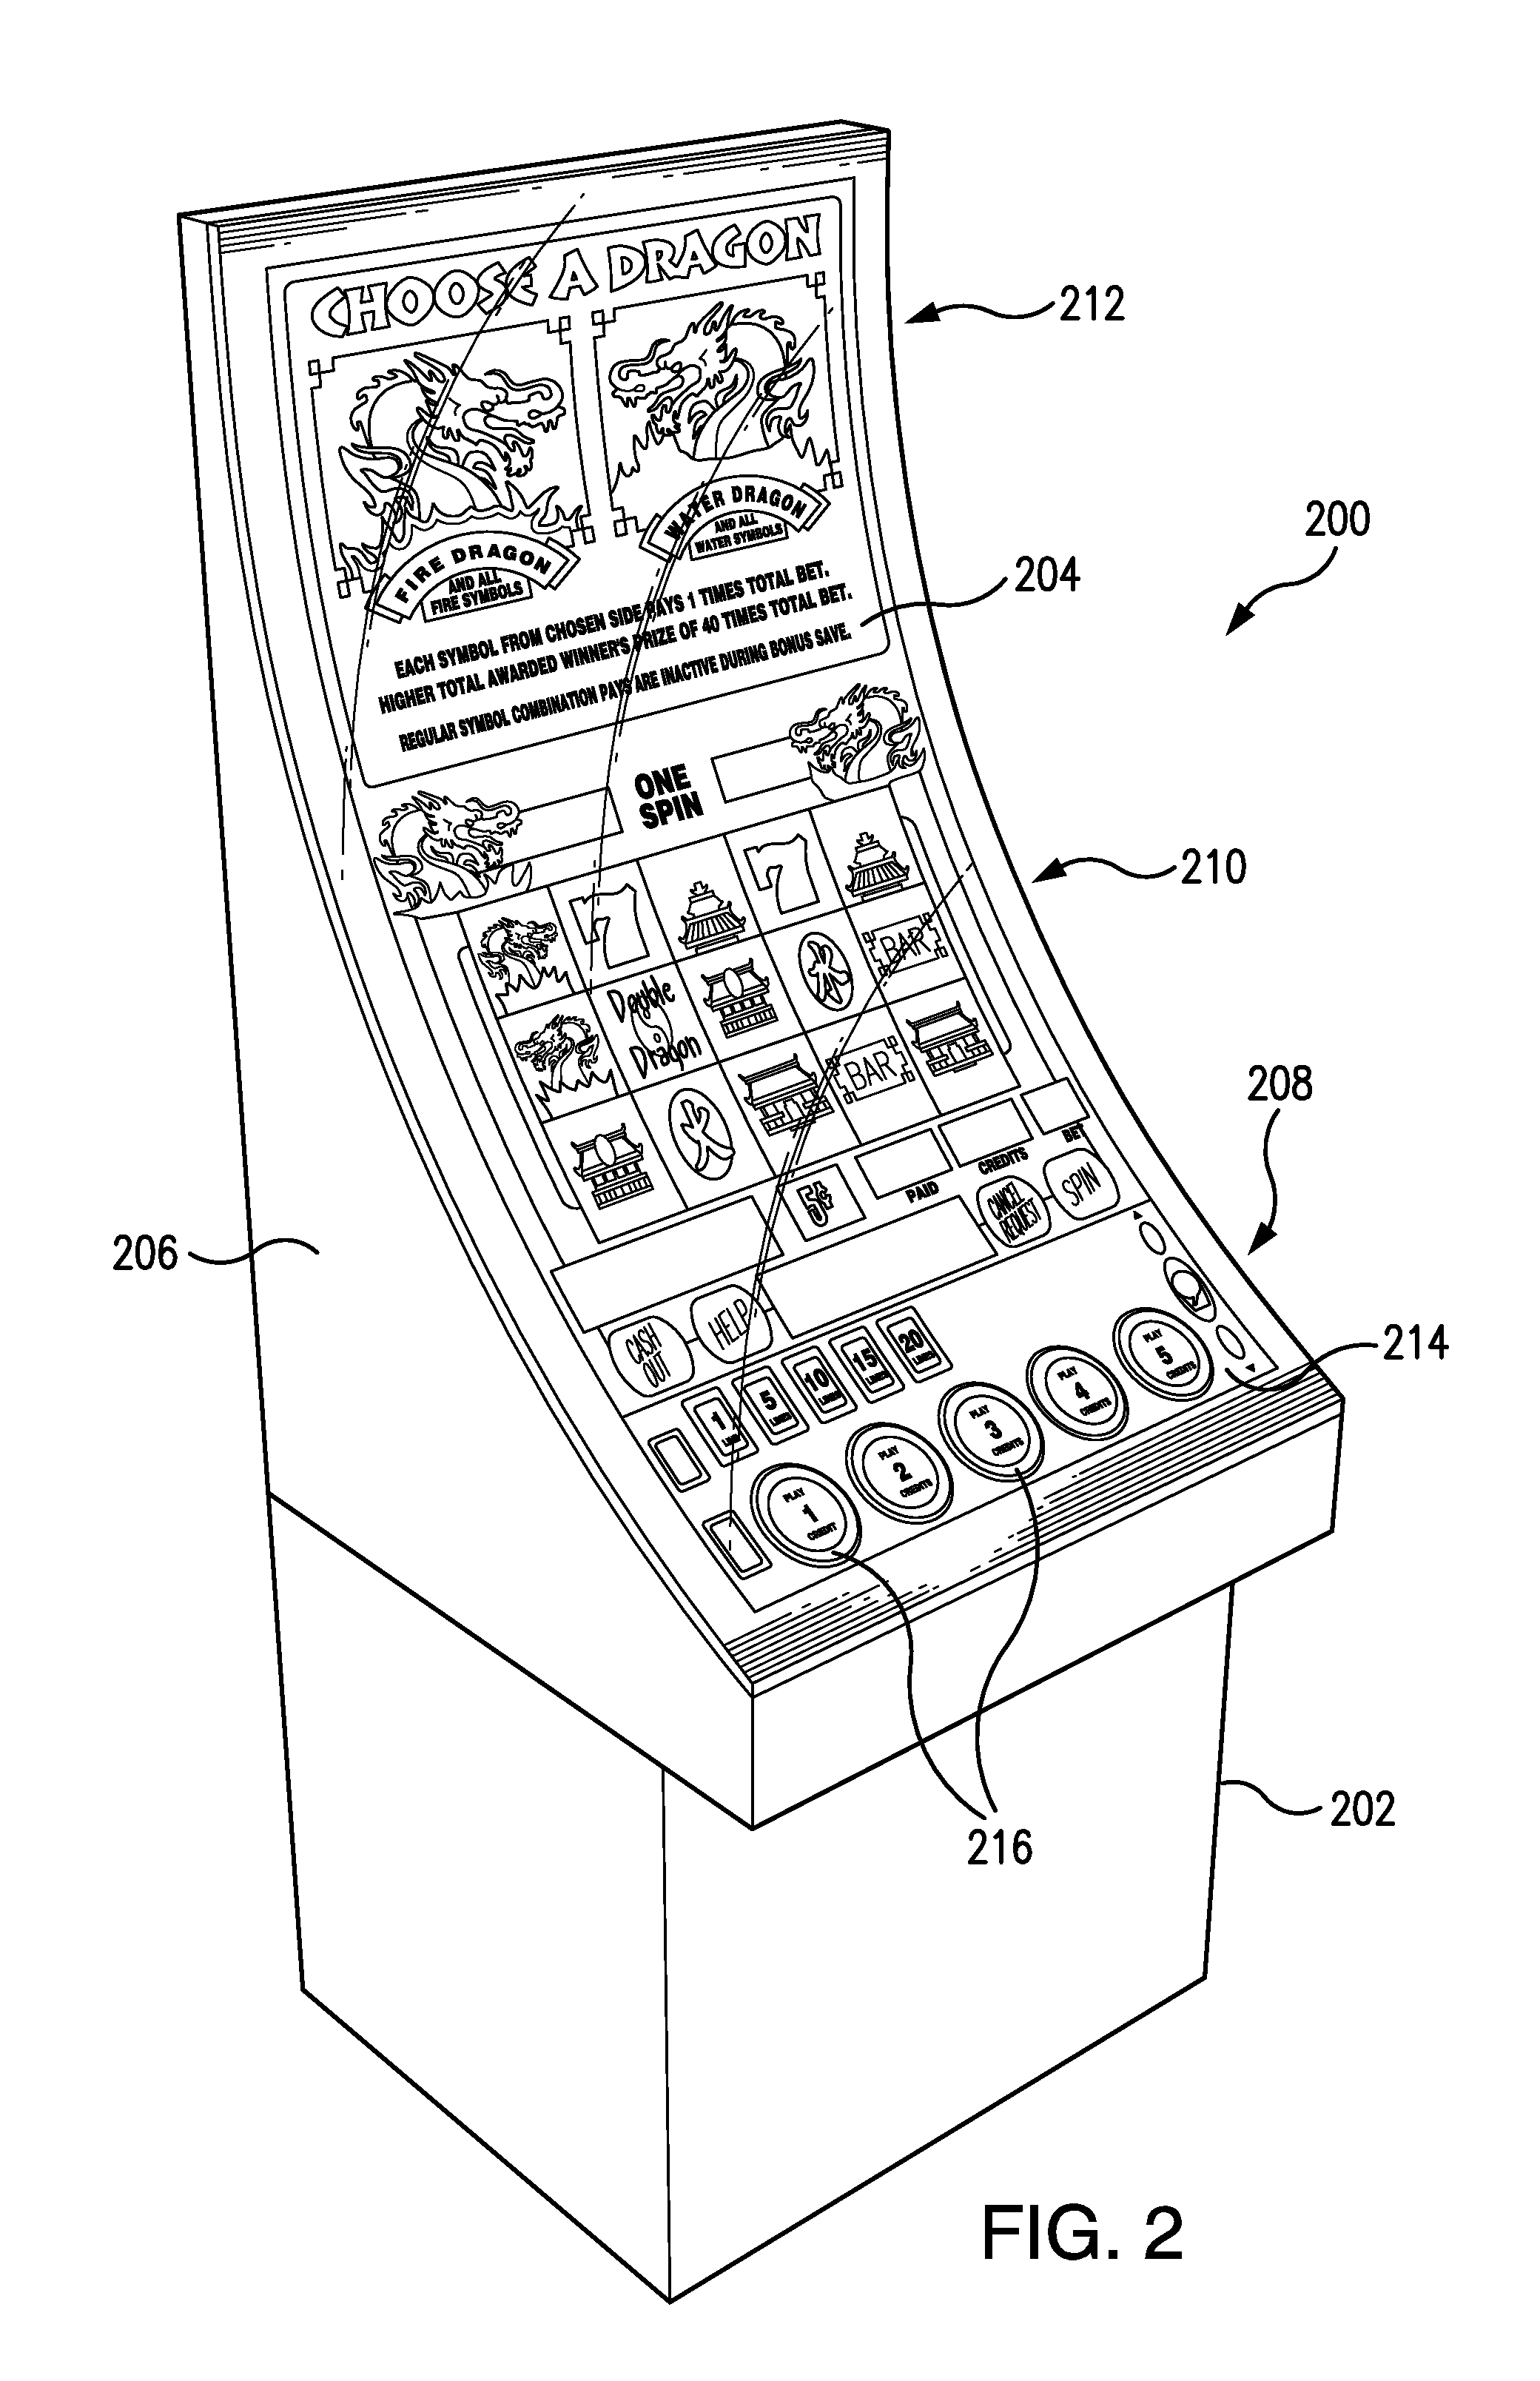 Video terminal having a curved, unified display